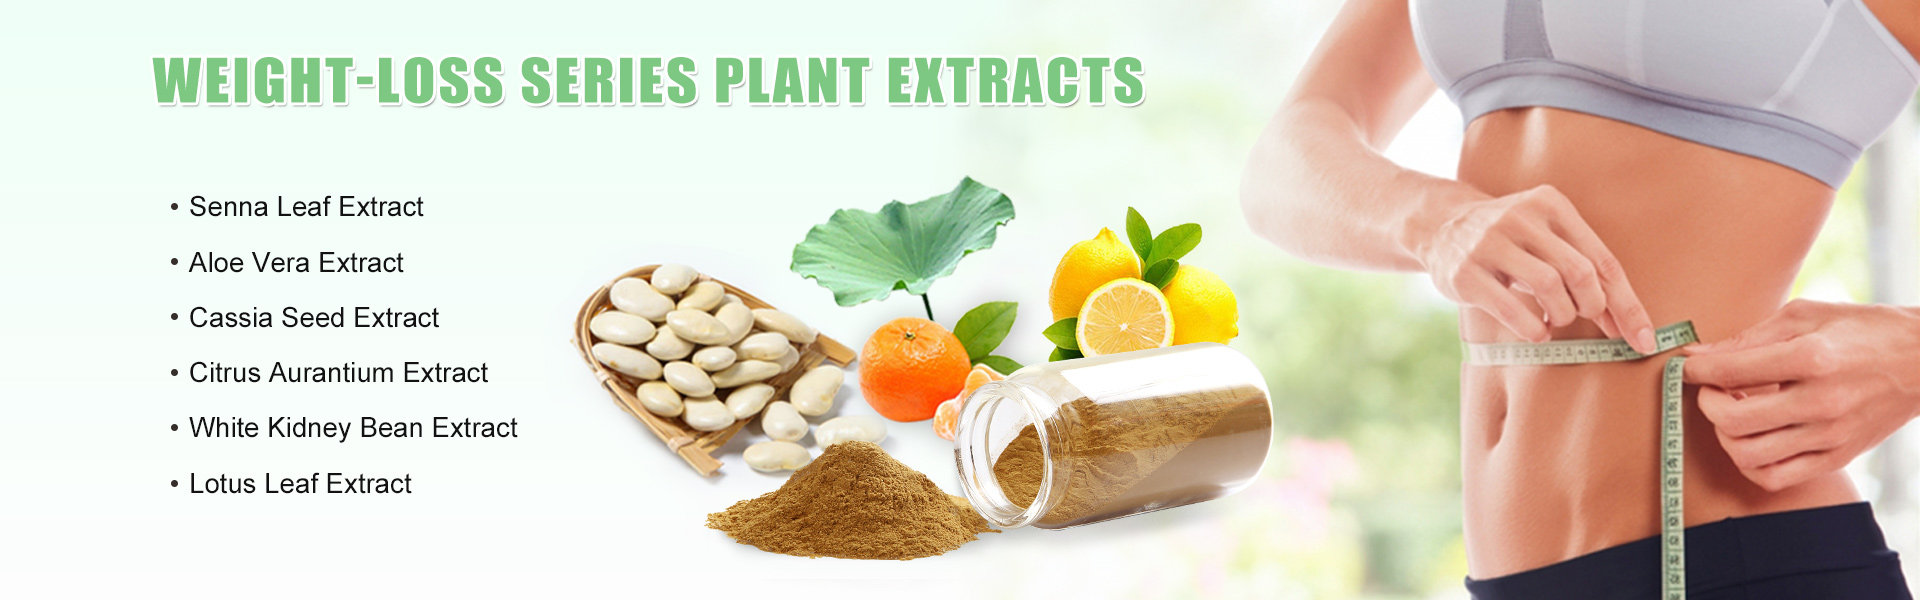 Weight-loss series plant extracts-xuhuang